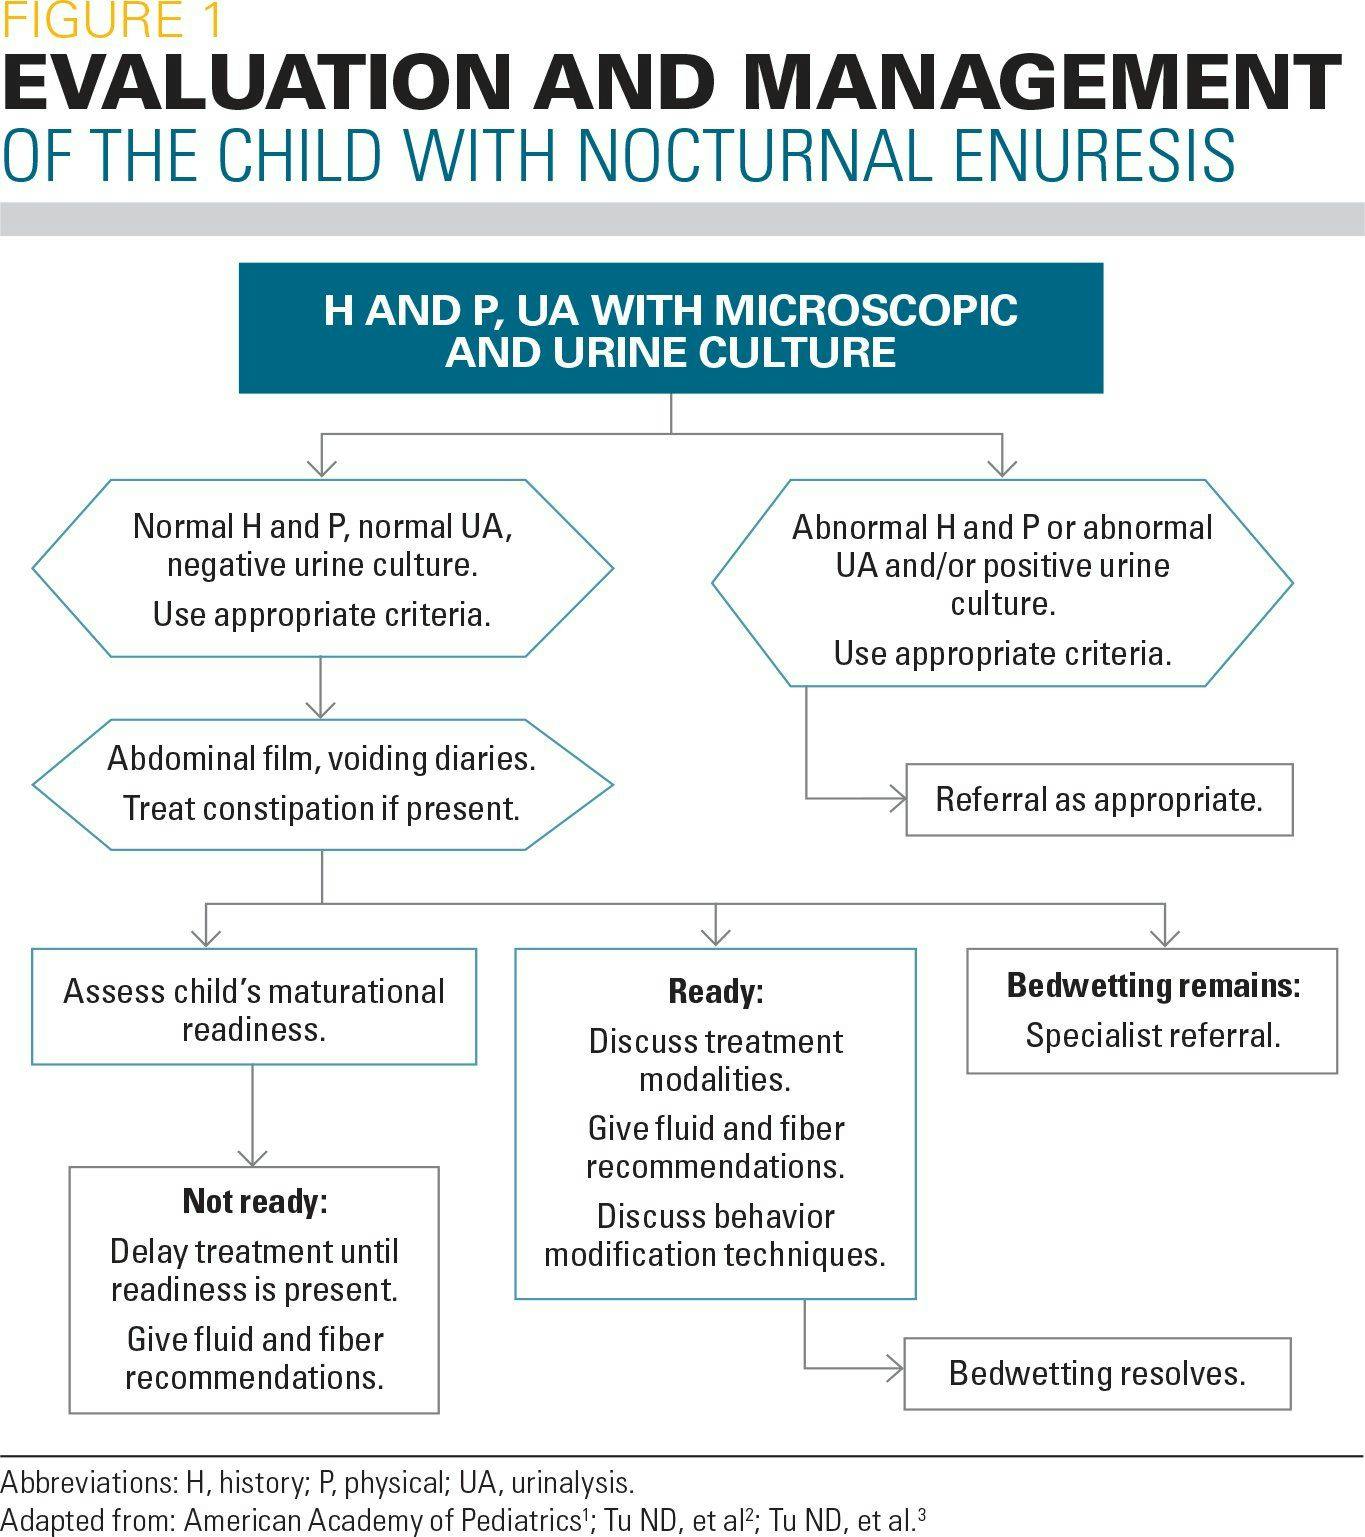 Evaluation and management of the child with nocturnal enuresis